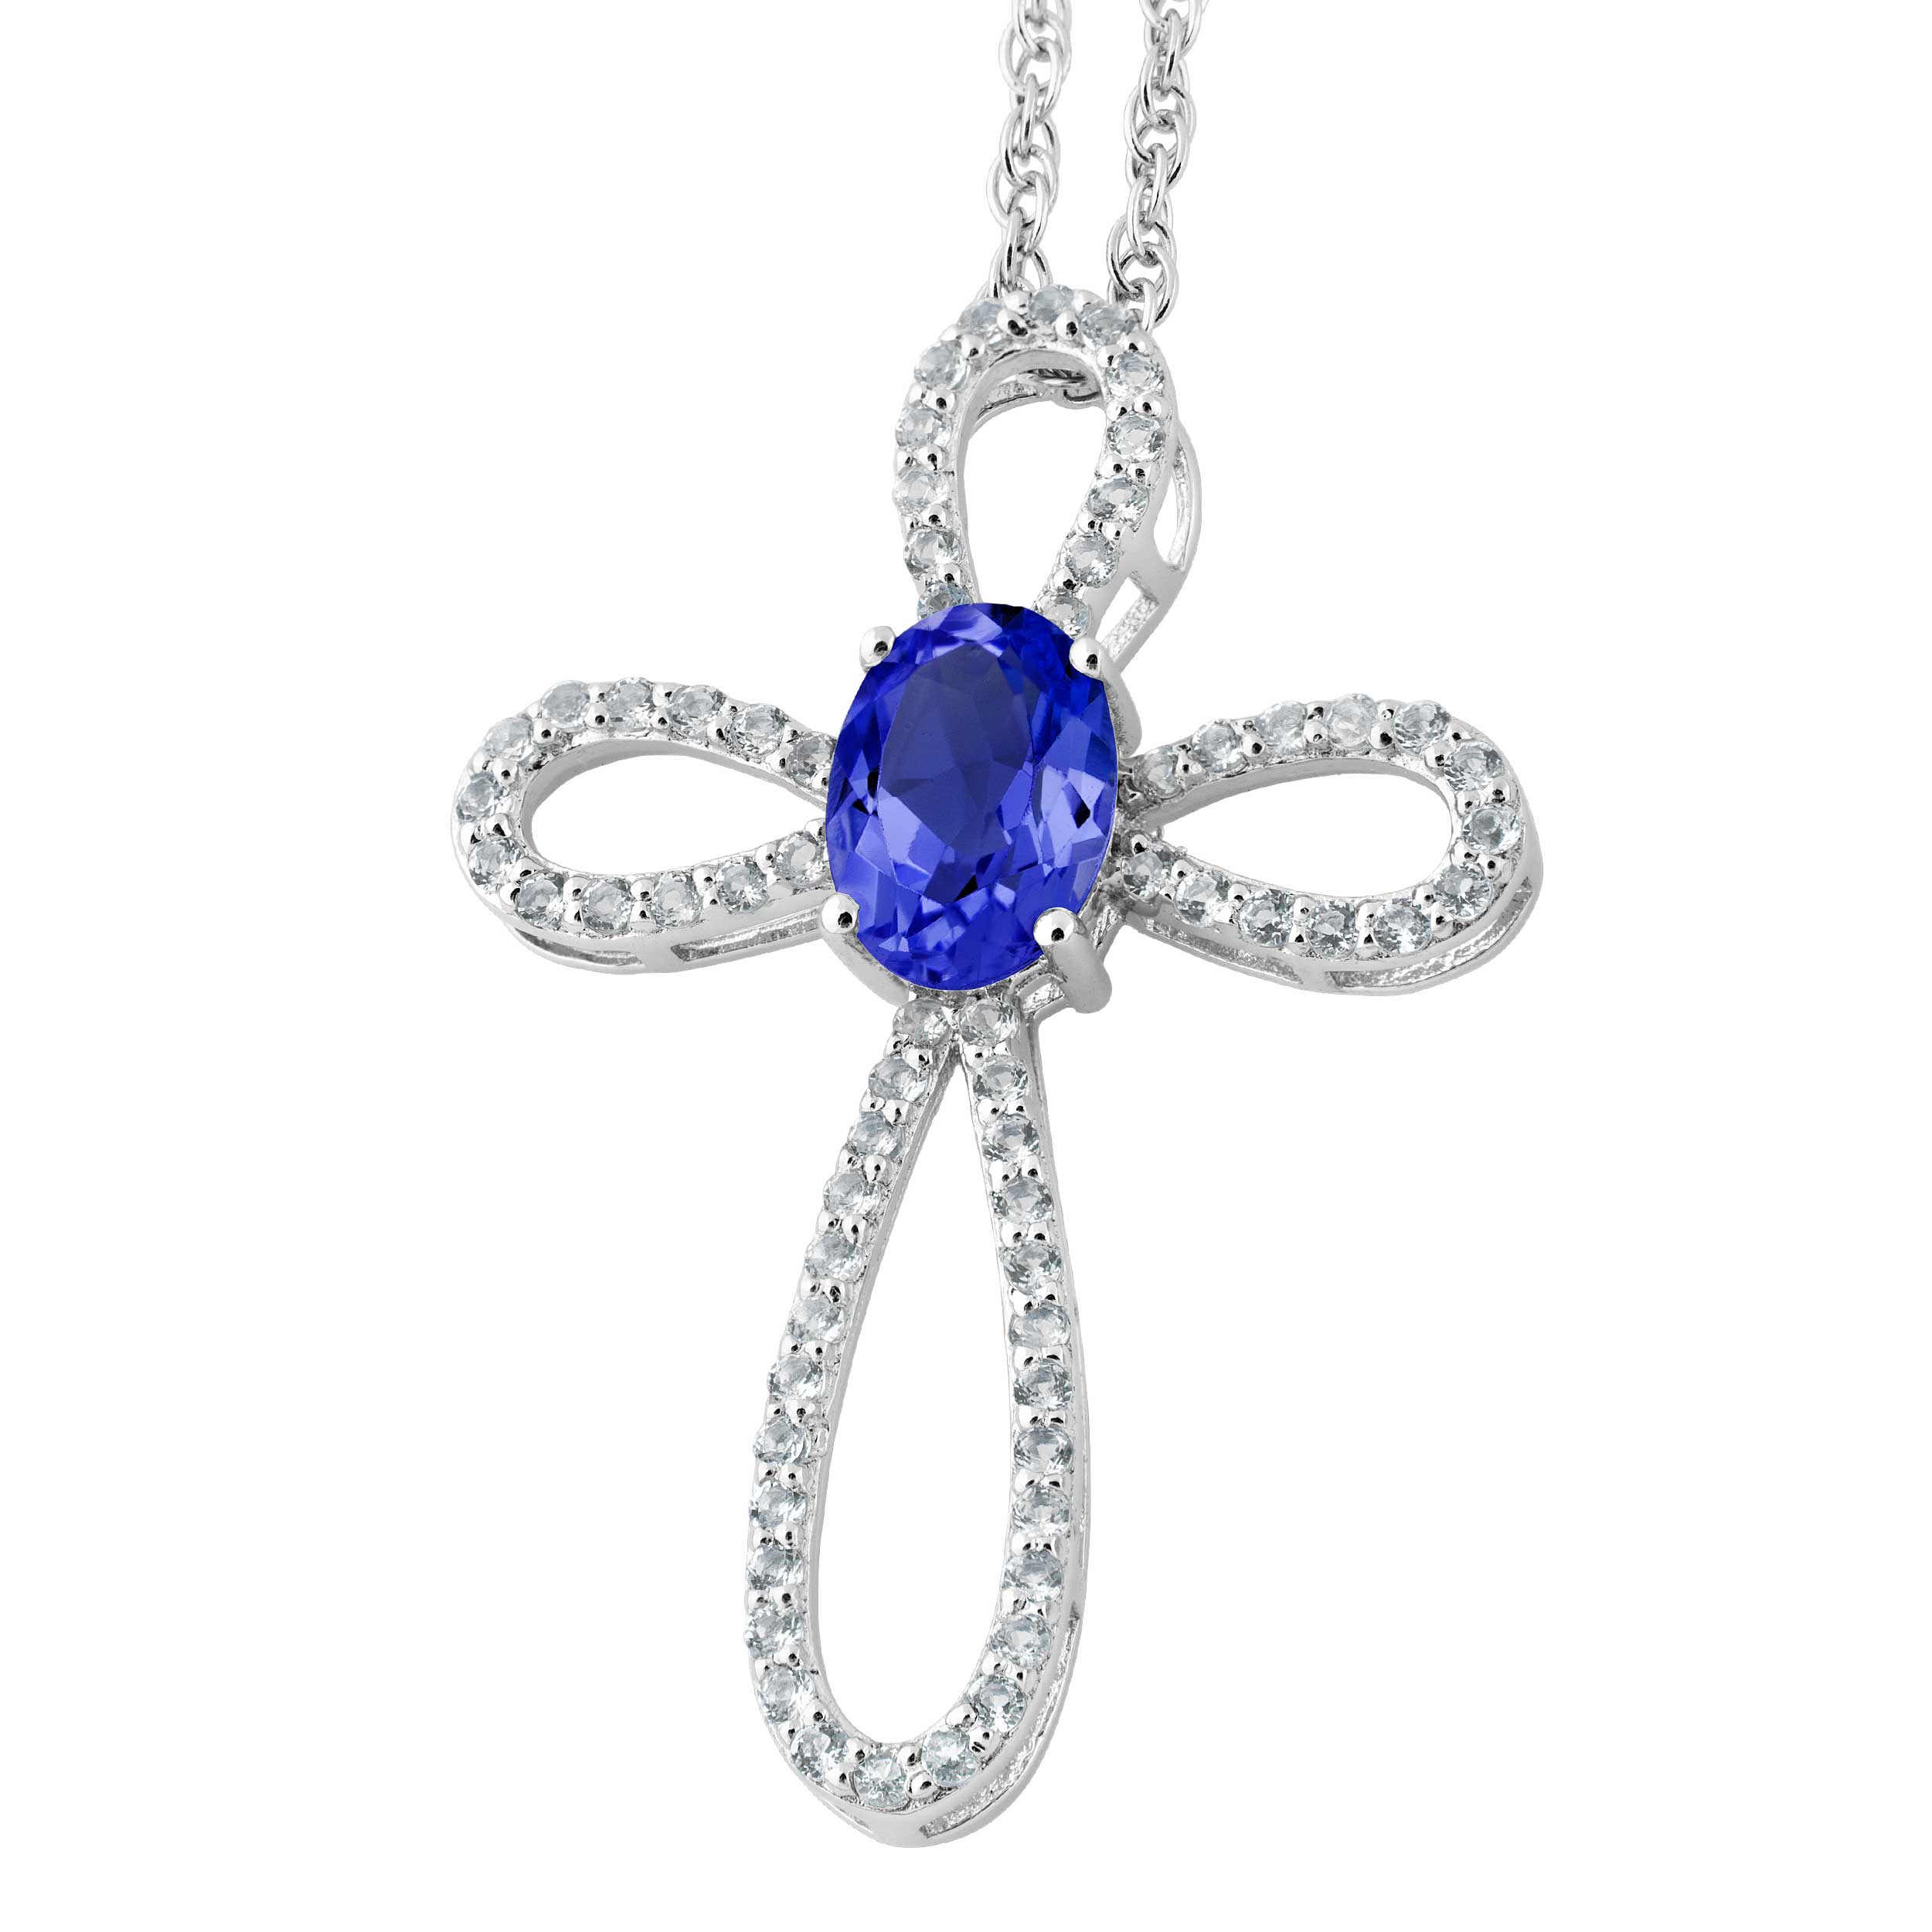 Oval Created Blue Sapphire and White Topaz Cross Pendant Necklace, Rhodium Plated Sterling Silver